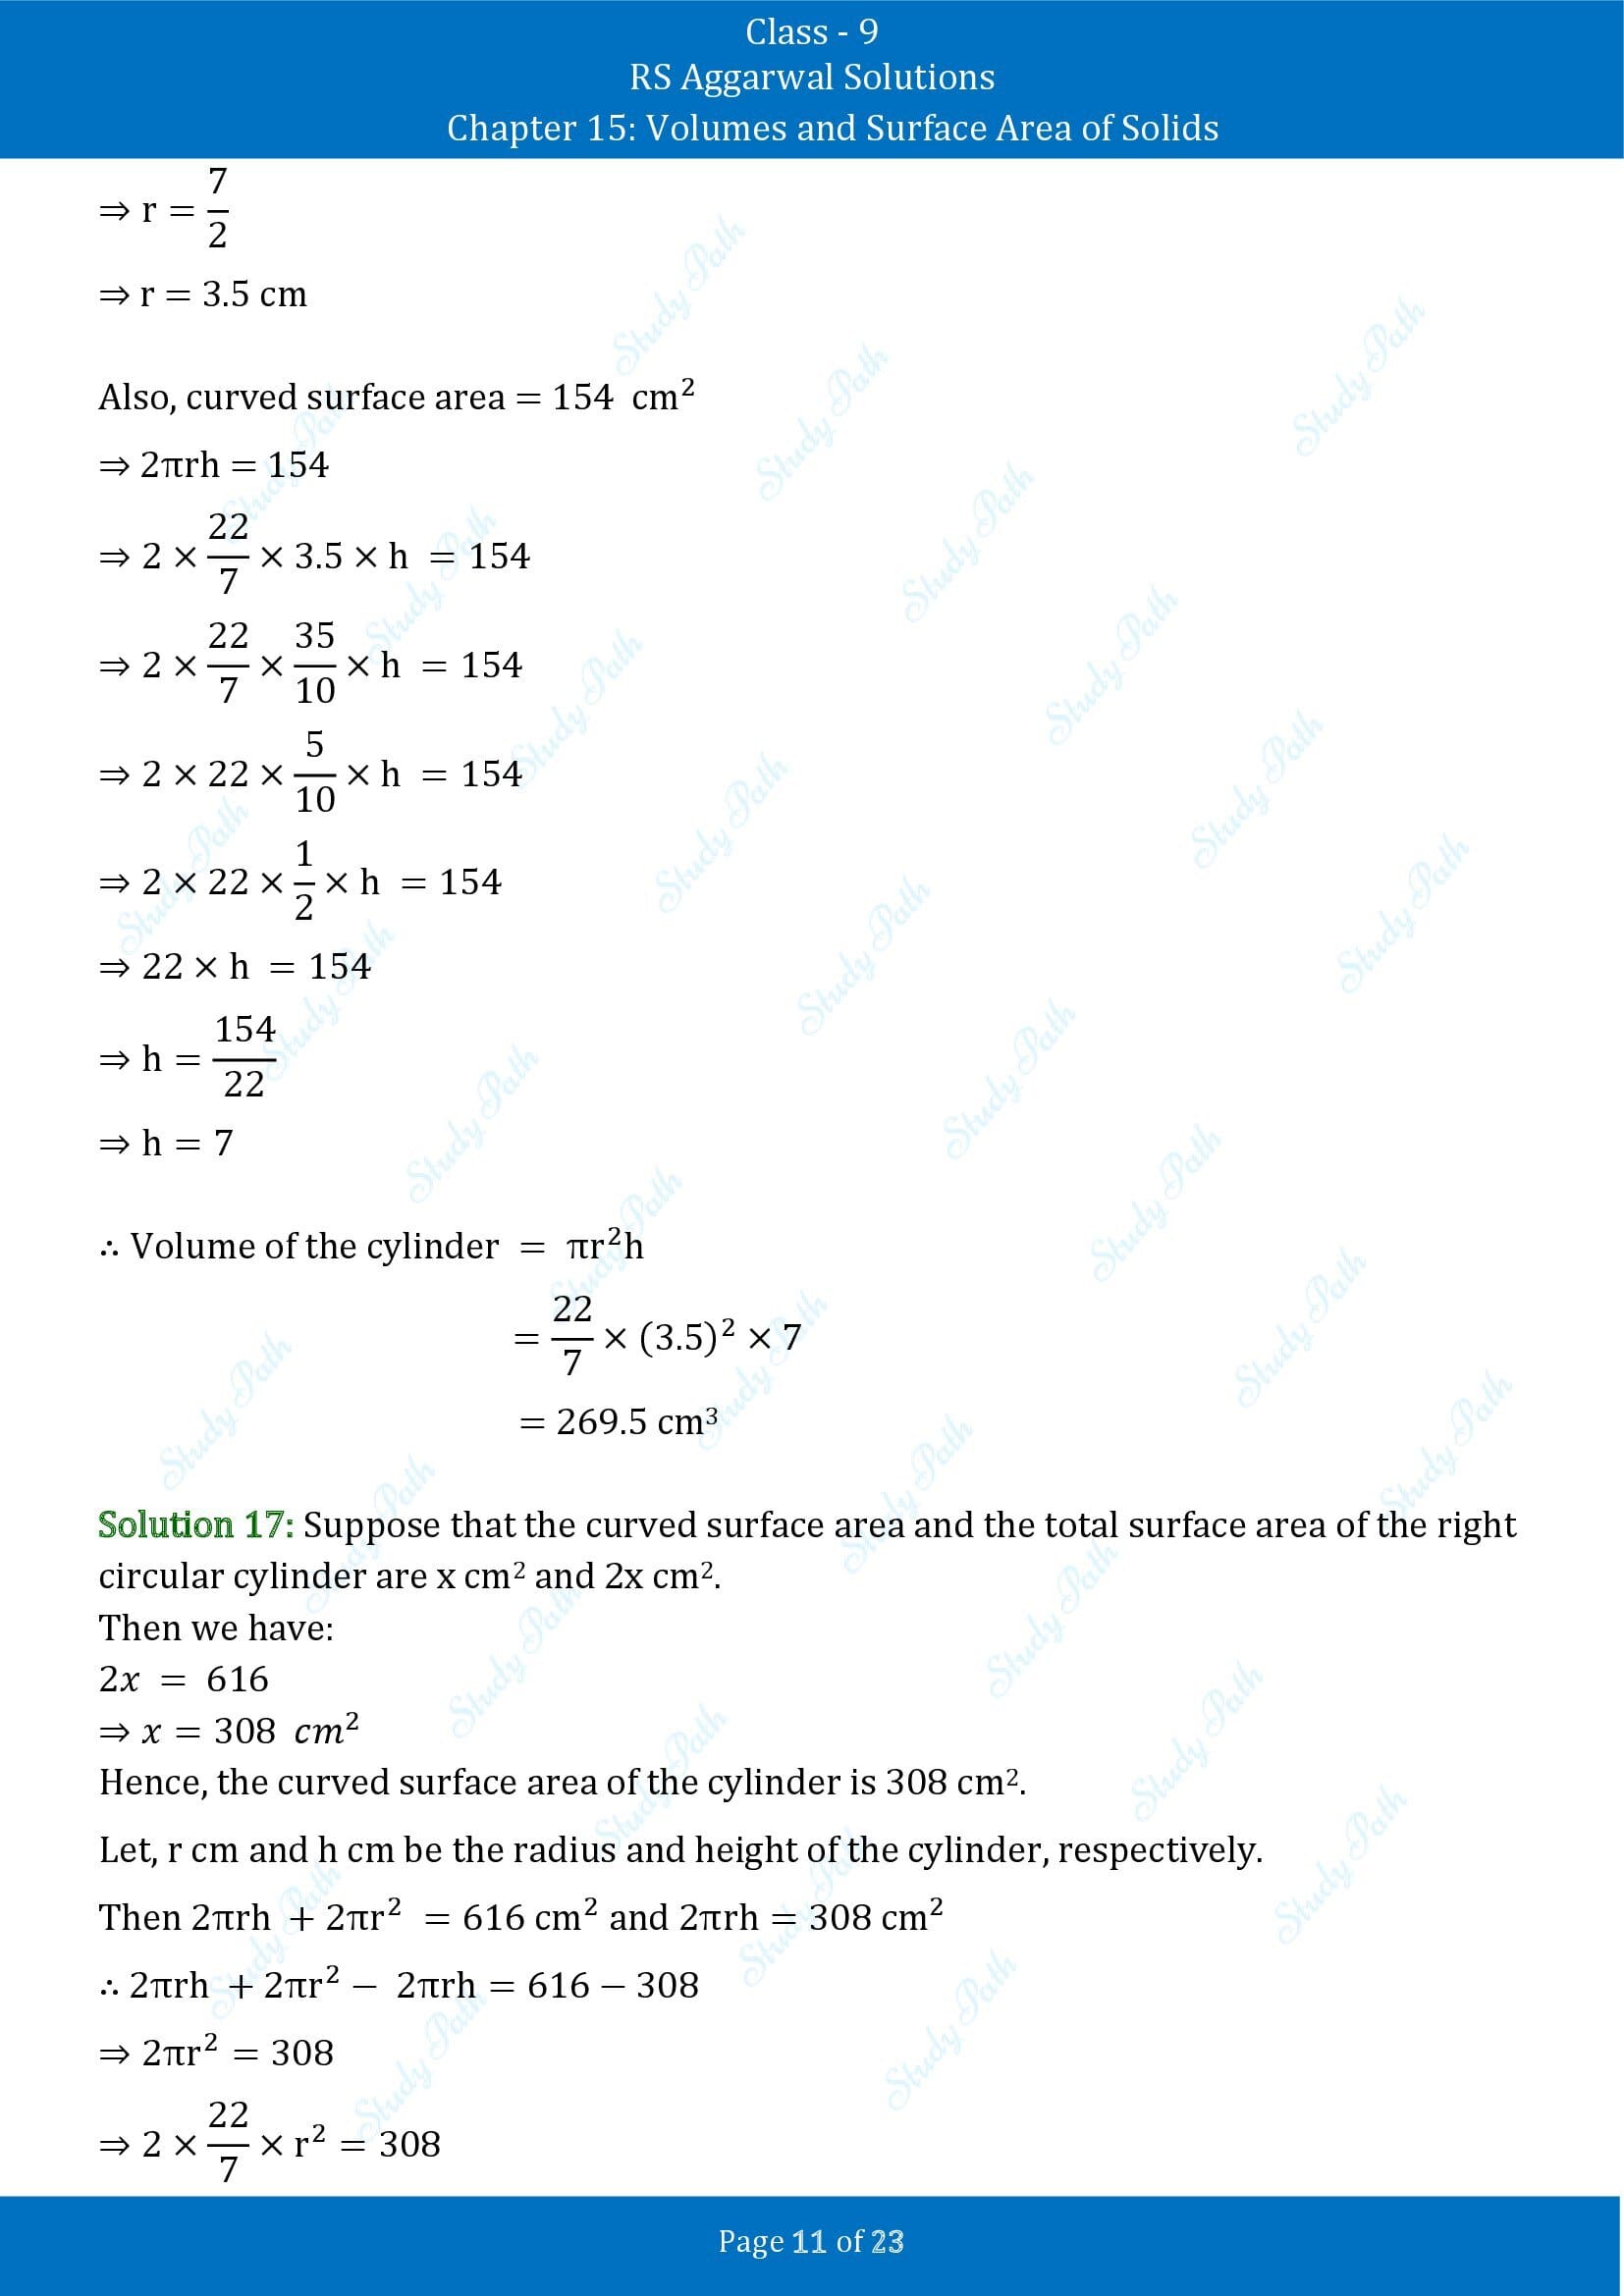 RS Aggarwal Solutions Class 9 Chapter 15 Volumes and Surface Area of Solids Exercise 15B 00011